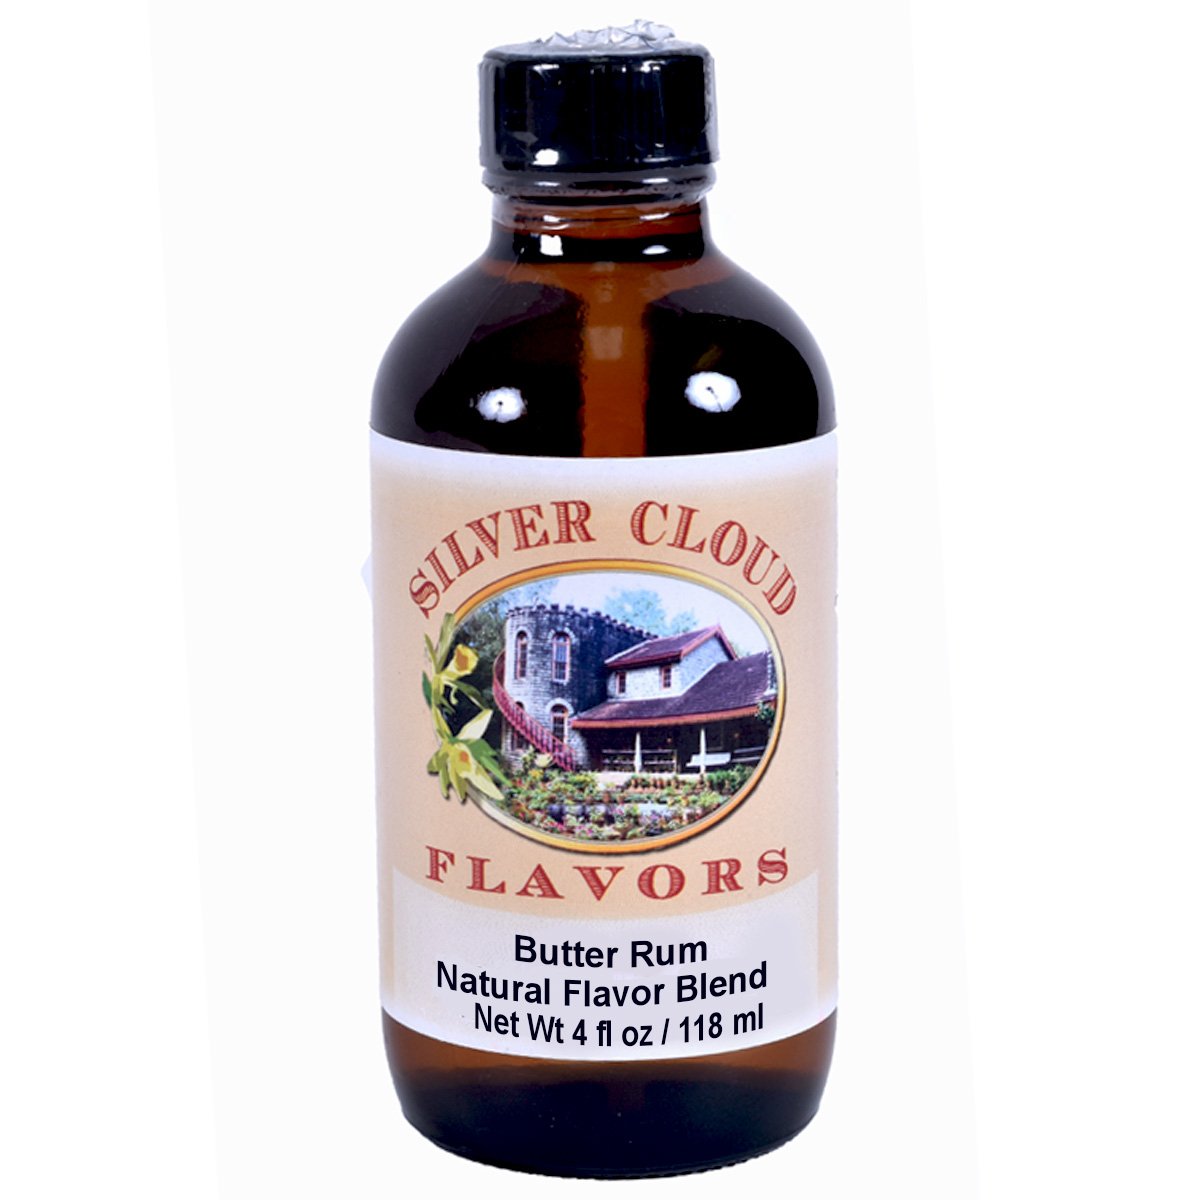 Butter Rum Type, Natural Flavor Blend Silver Cloud Extract - Bake Supply Plus